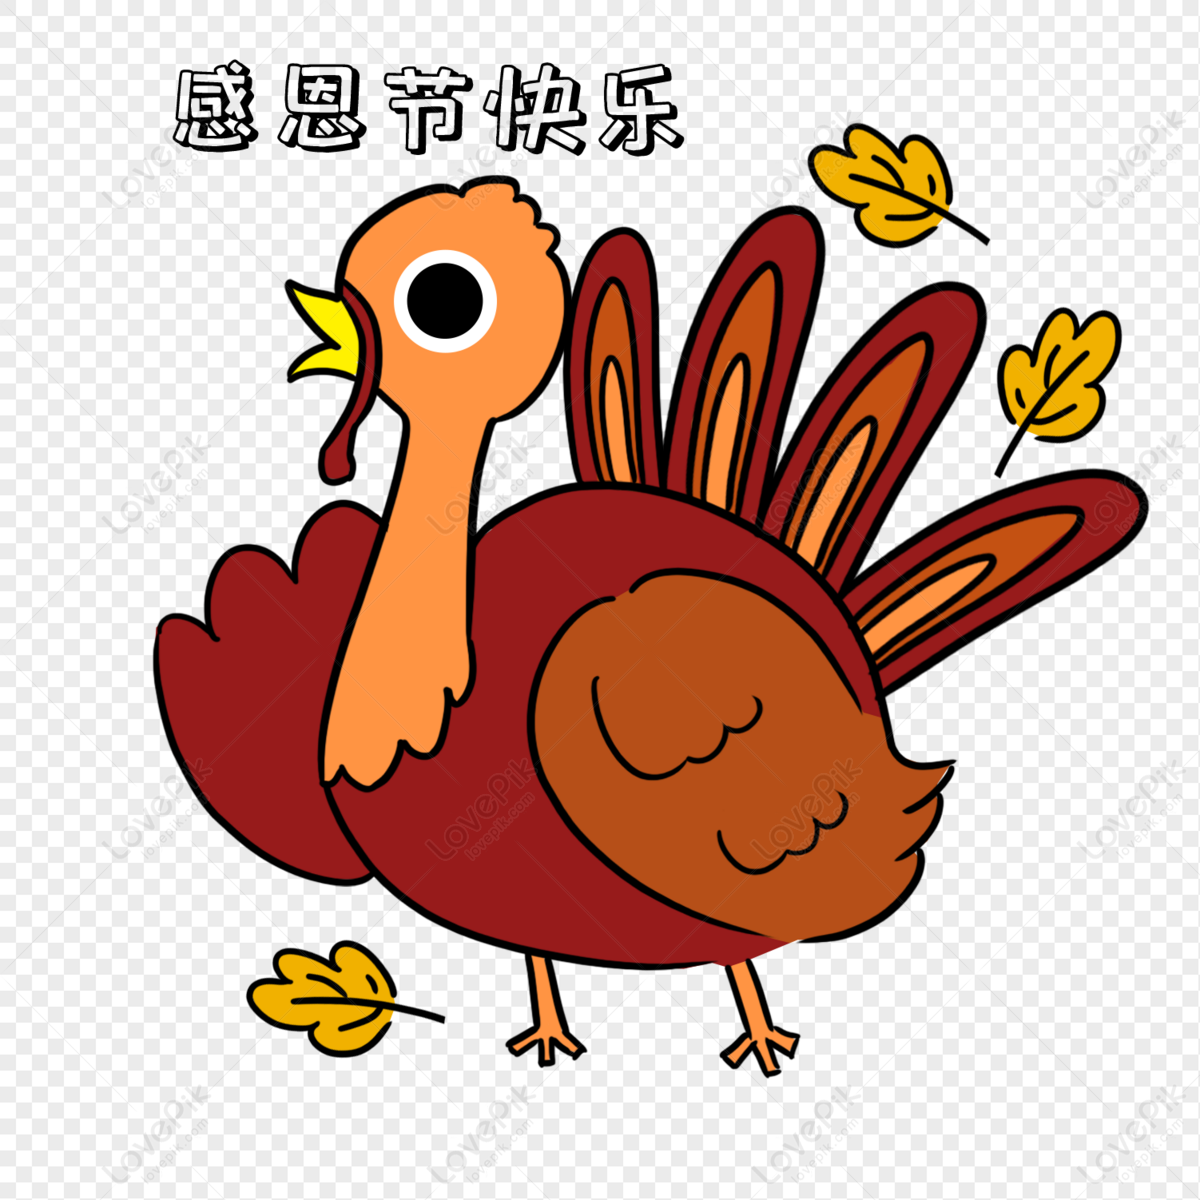 Cartoon Cute Thanksgiving Turkey PNG White Transparent And Clipart Image  For Free Download - Lovepik | 401650772